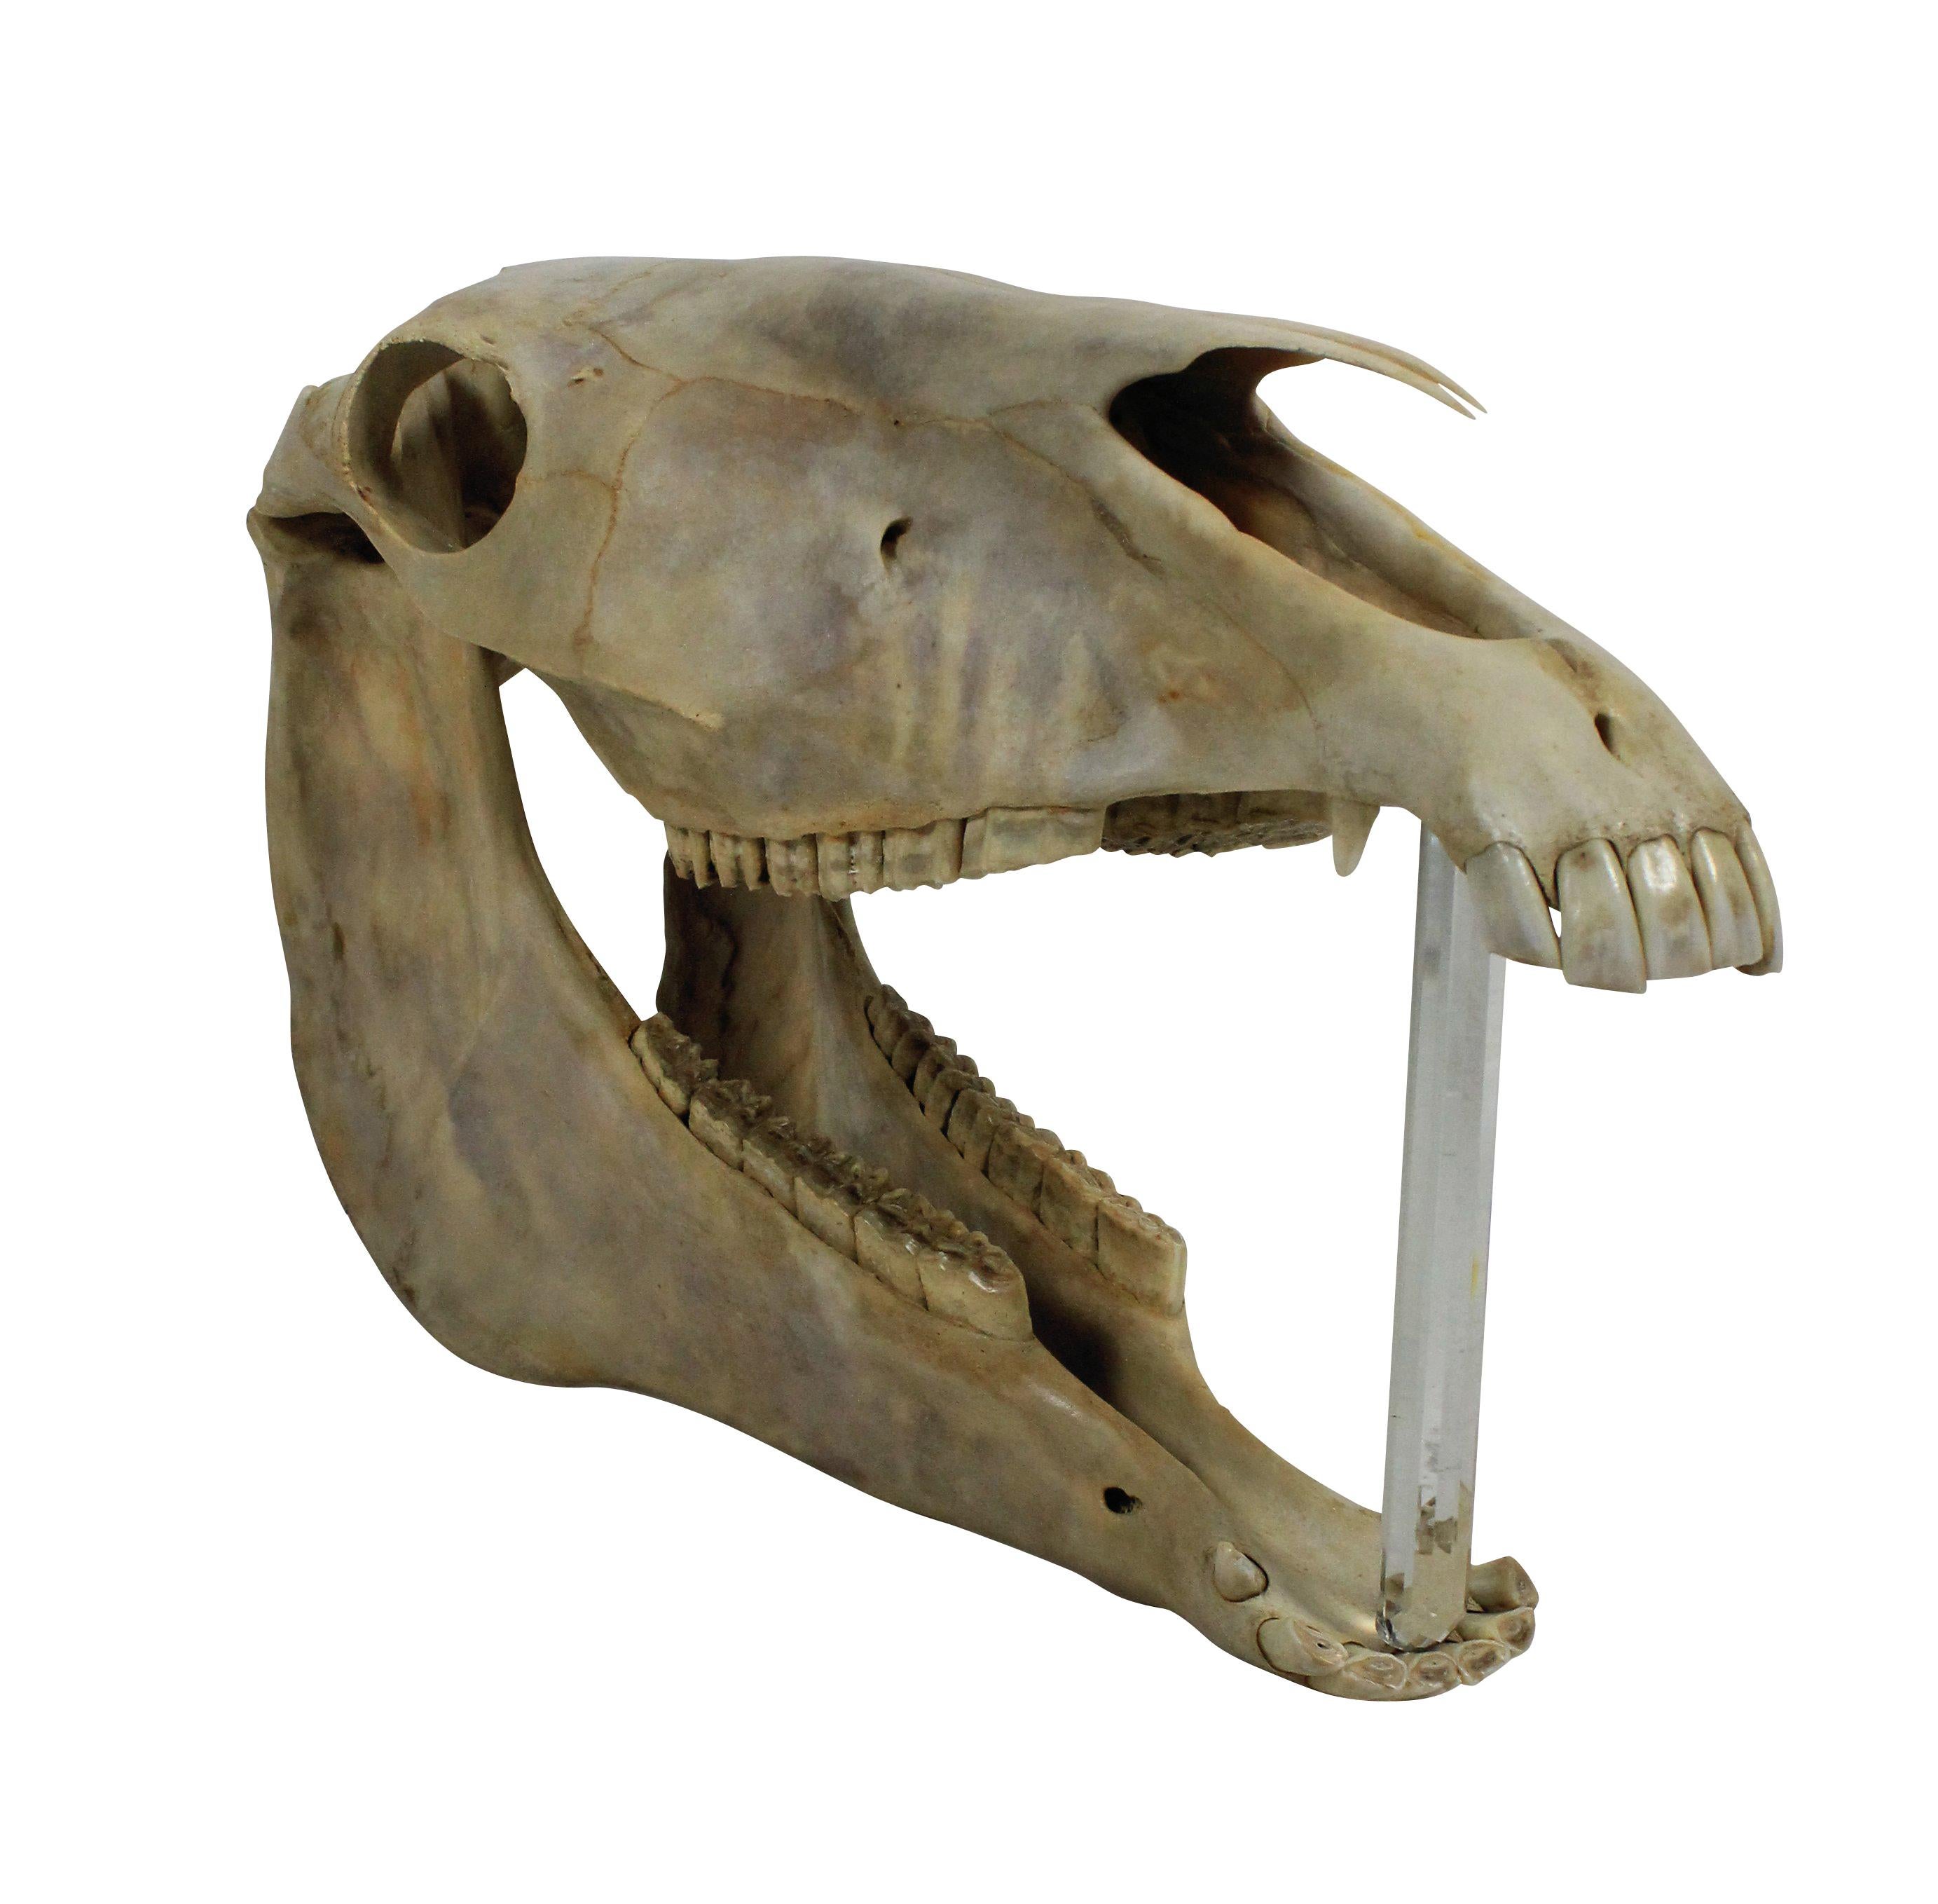 horse skull front view